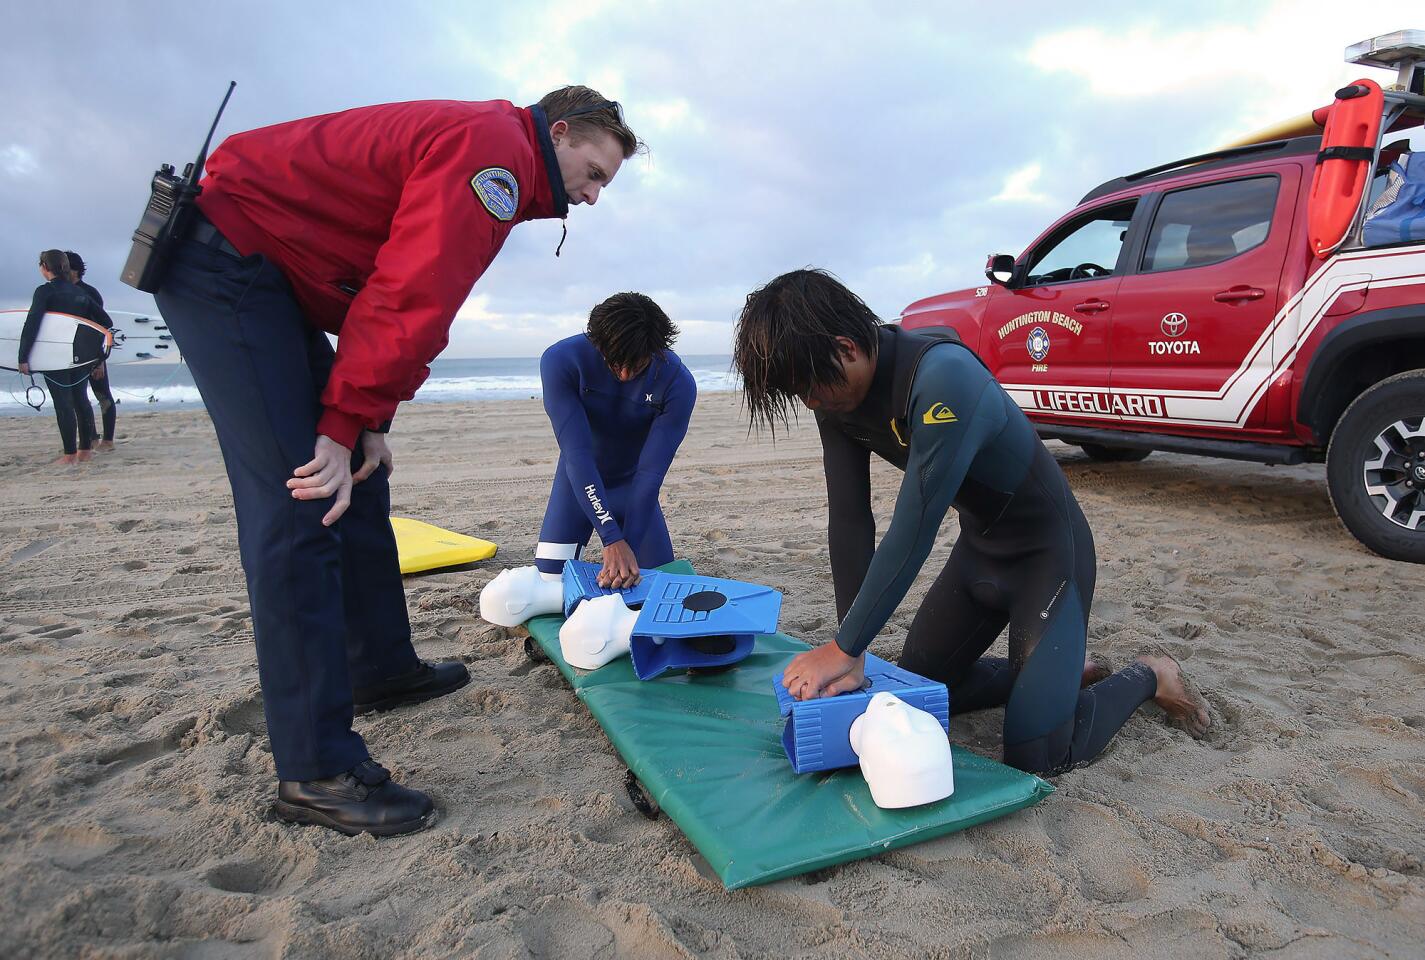 Huntington Beach marine safety officer Sterling Foxcroft teaches Huntington Beach High School students Sage Guinaleo, center, and Keanu Igarashi proper chest compression methods during a session Wednesday to train members of the school surf team in lifesaving techniques.